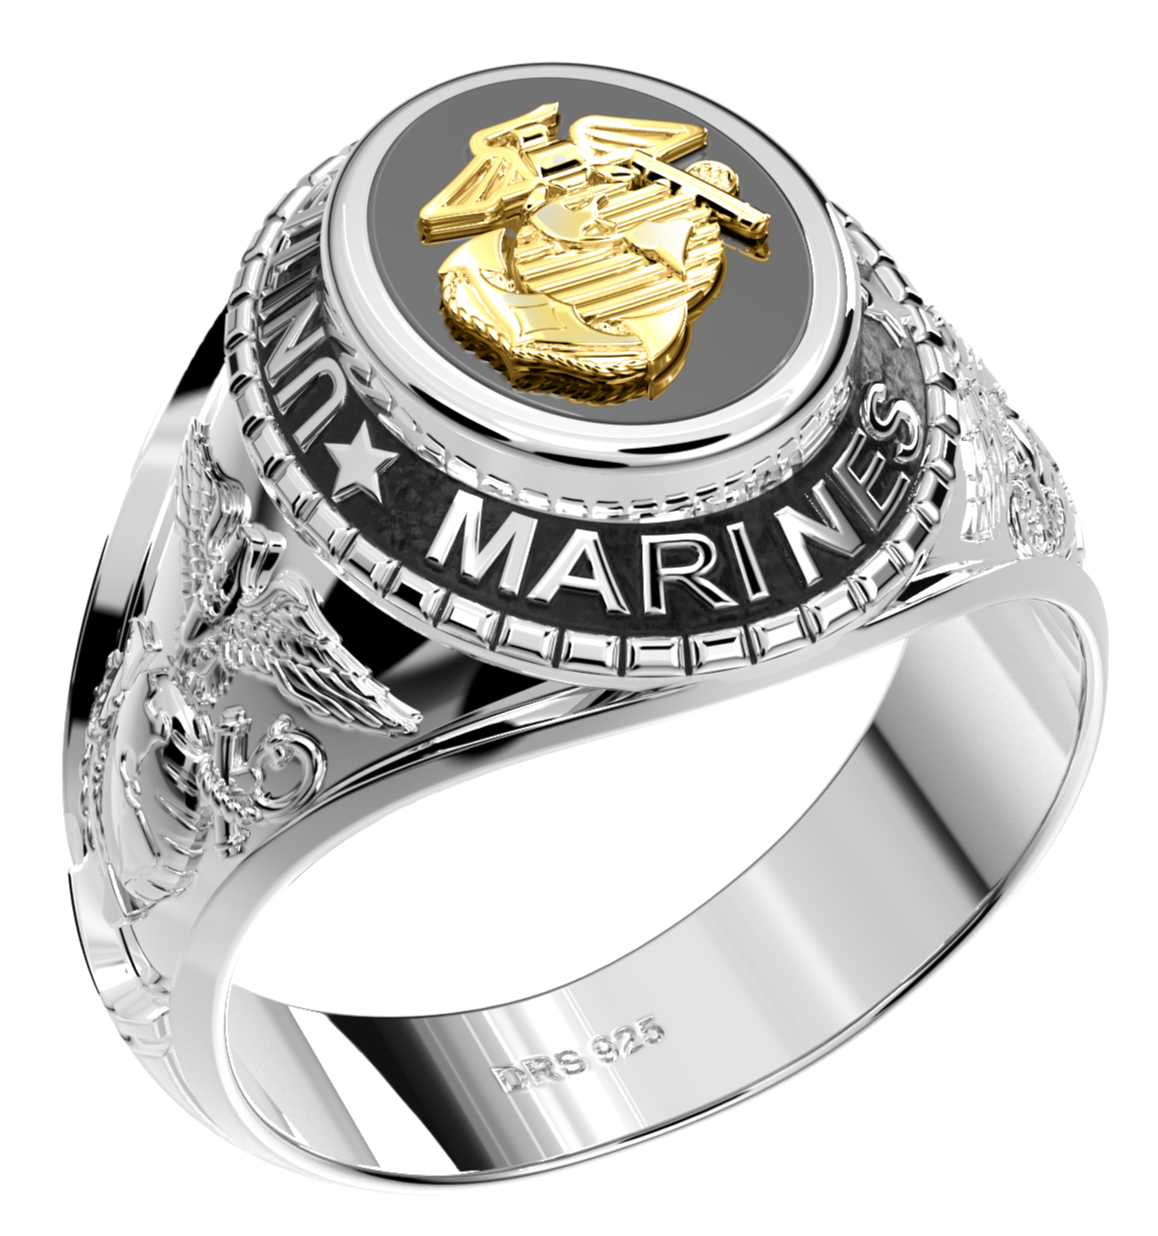 Customizable Men's Medium 925 Sterling Silver United States Marine Corps Military Solid Back Ring